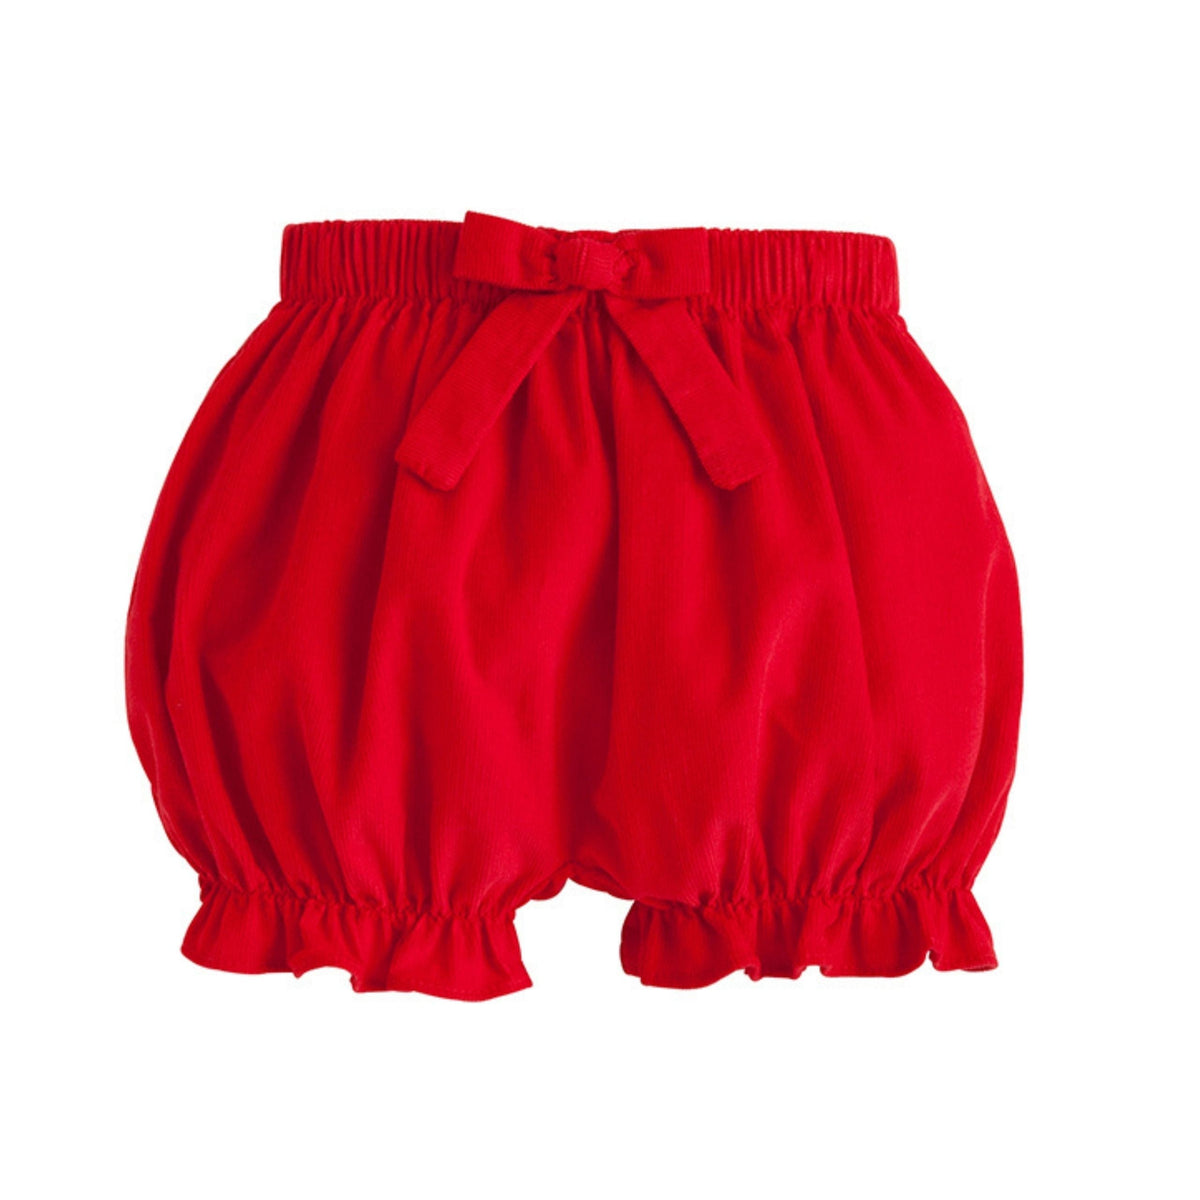 seguridadindustrialcr classic childrens clothing girls red corduroy bloomers with front bow